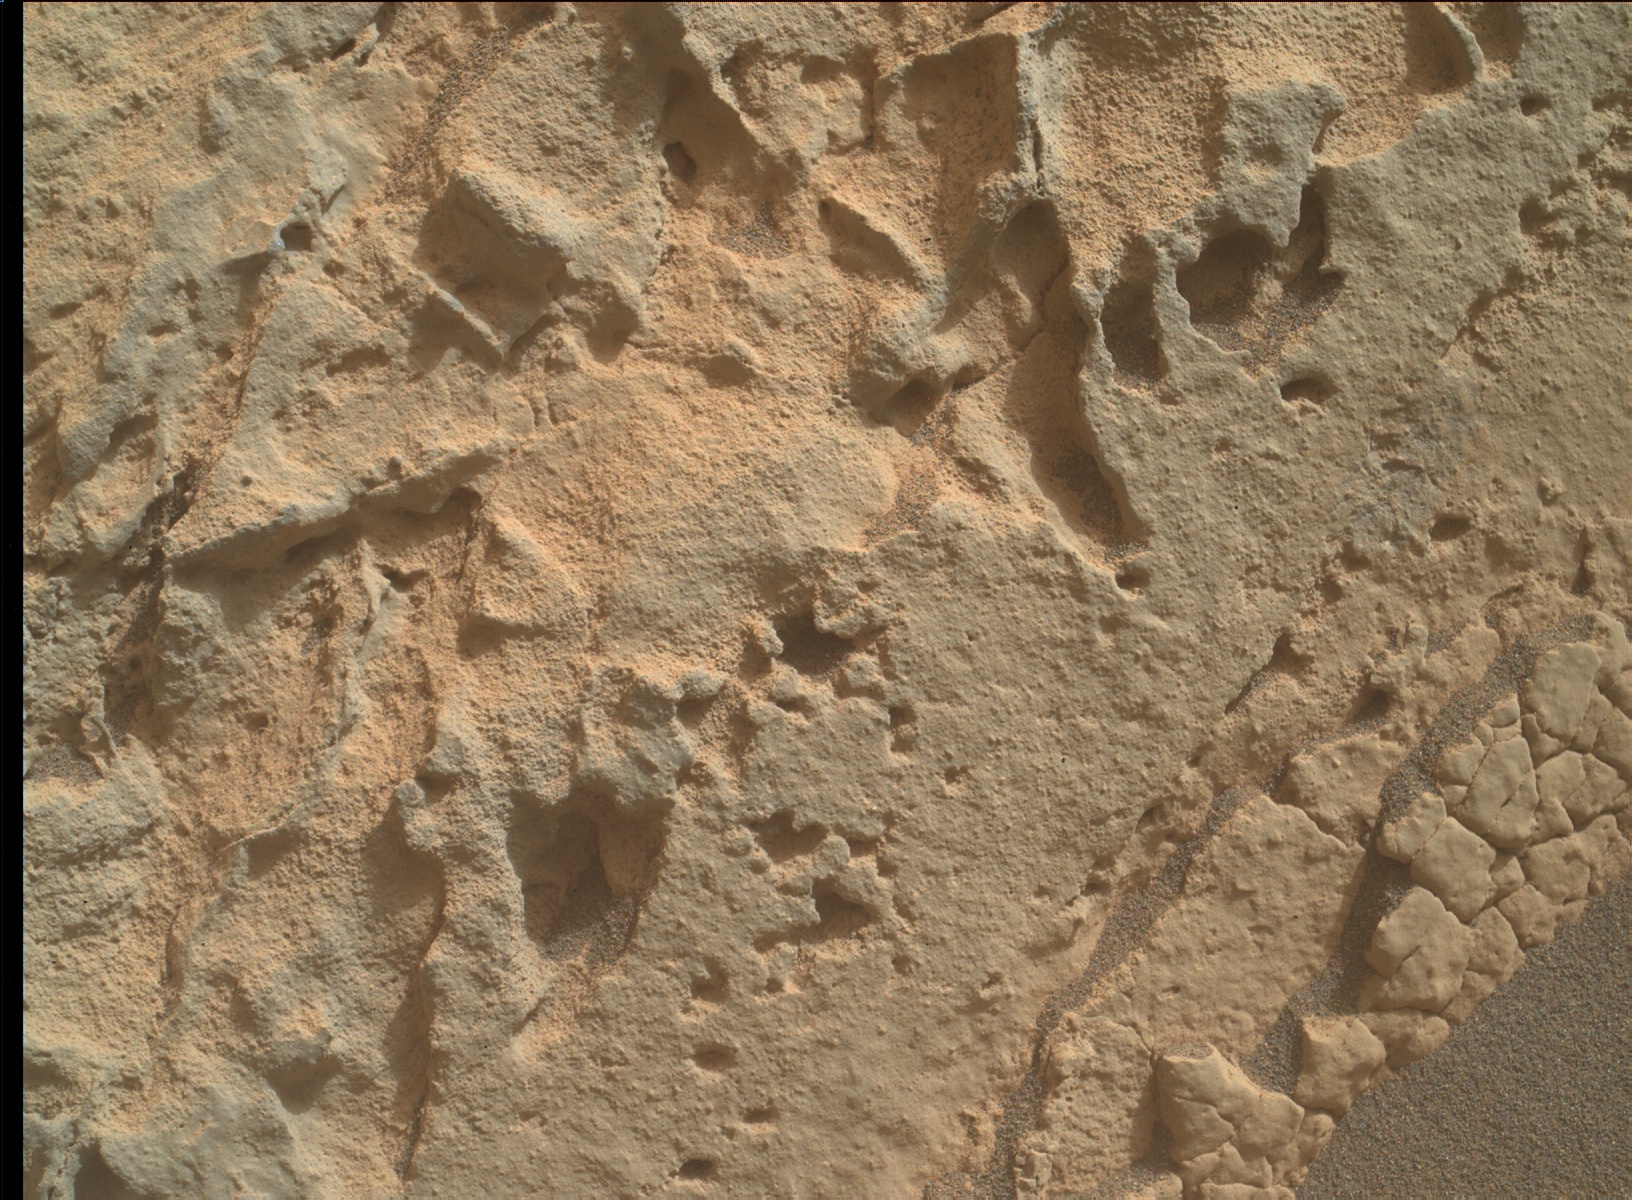 Nasa's Mars rover Curiosity acquired this image using its Mars Hand Lens Imager (MAHLI) on Sol 3442